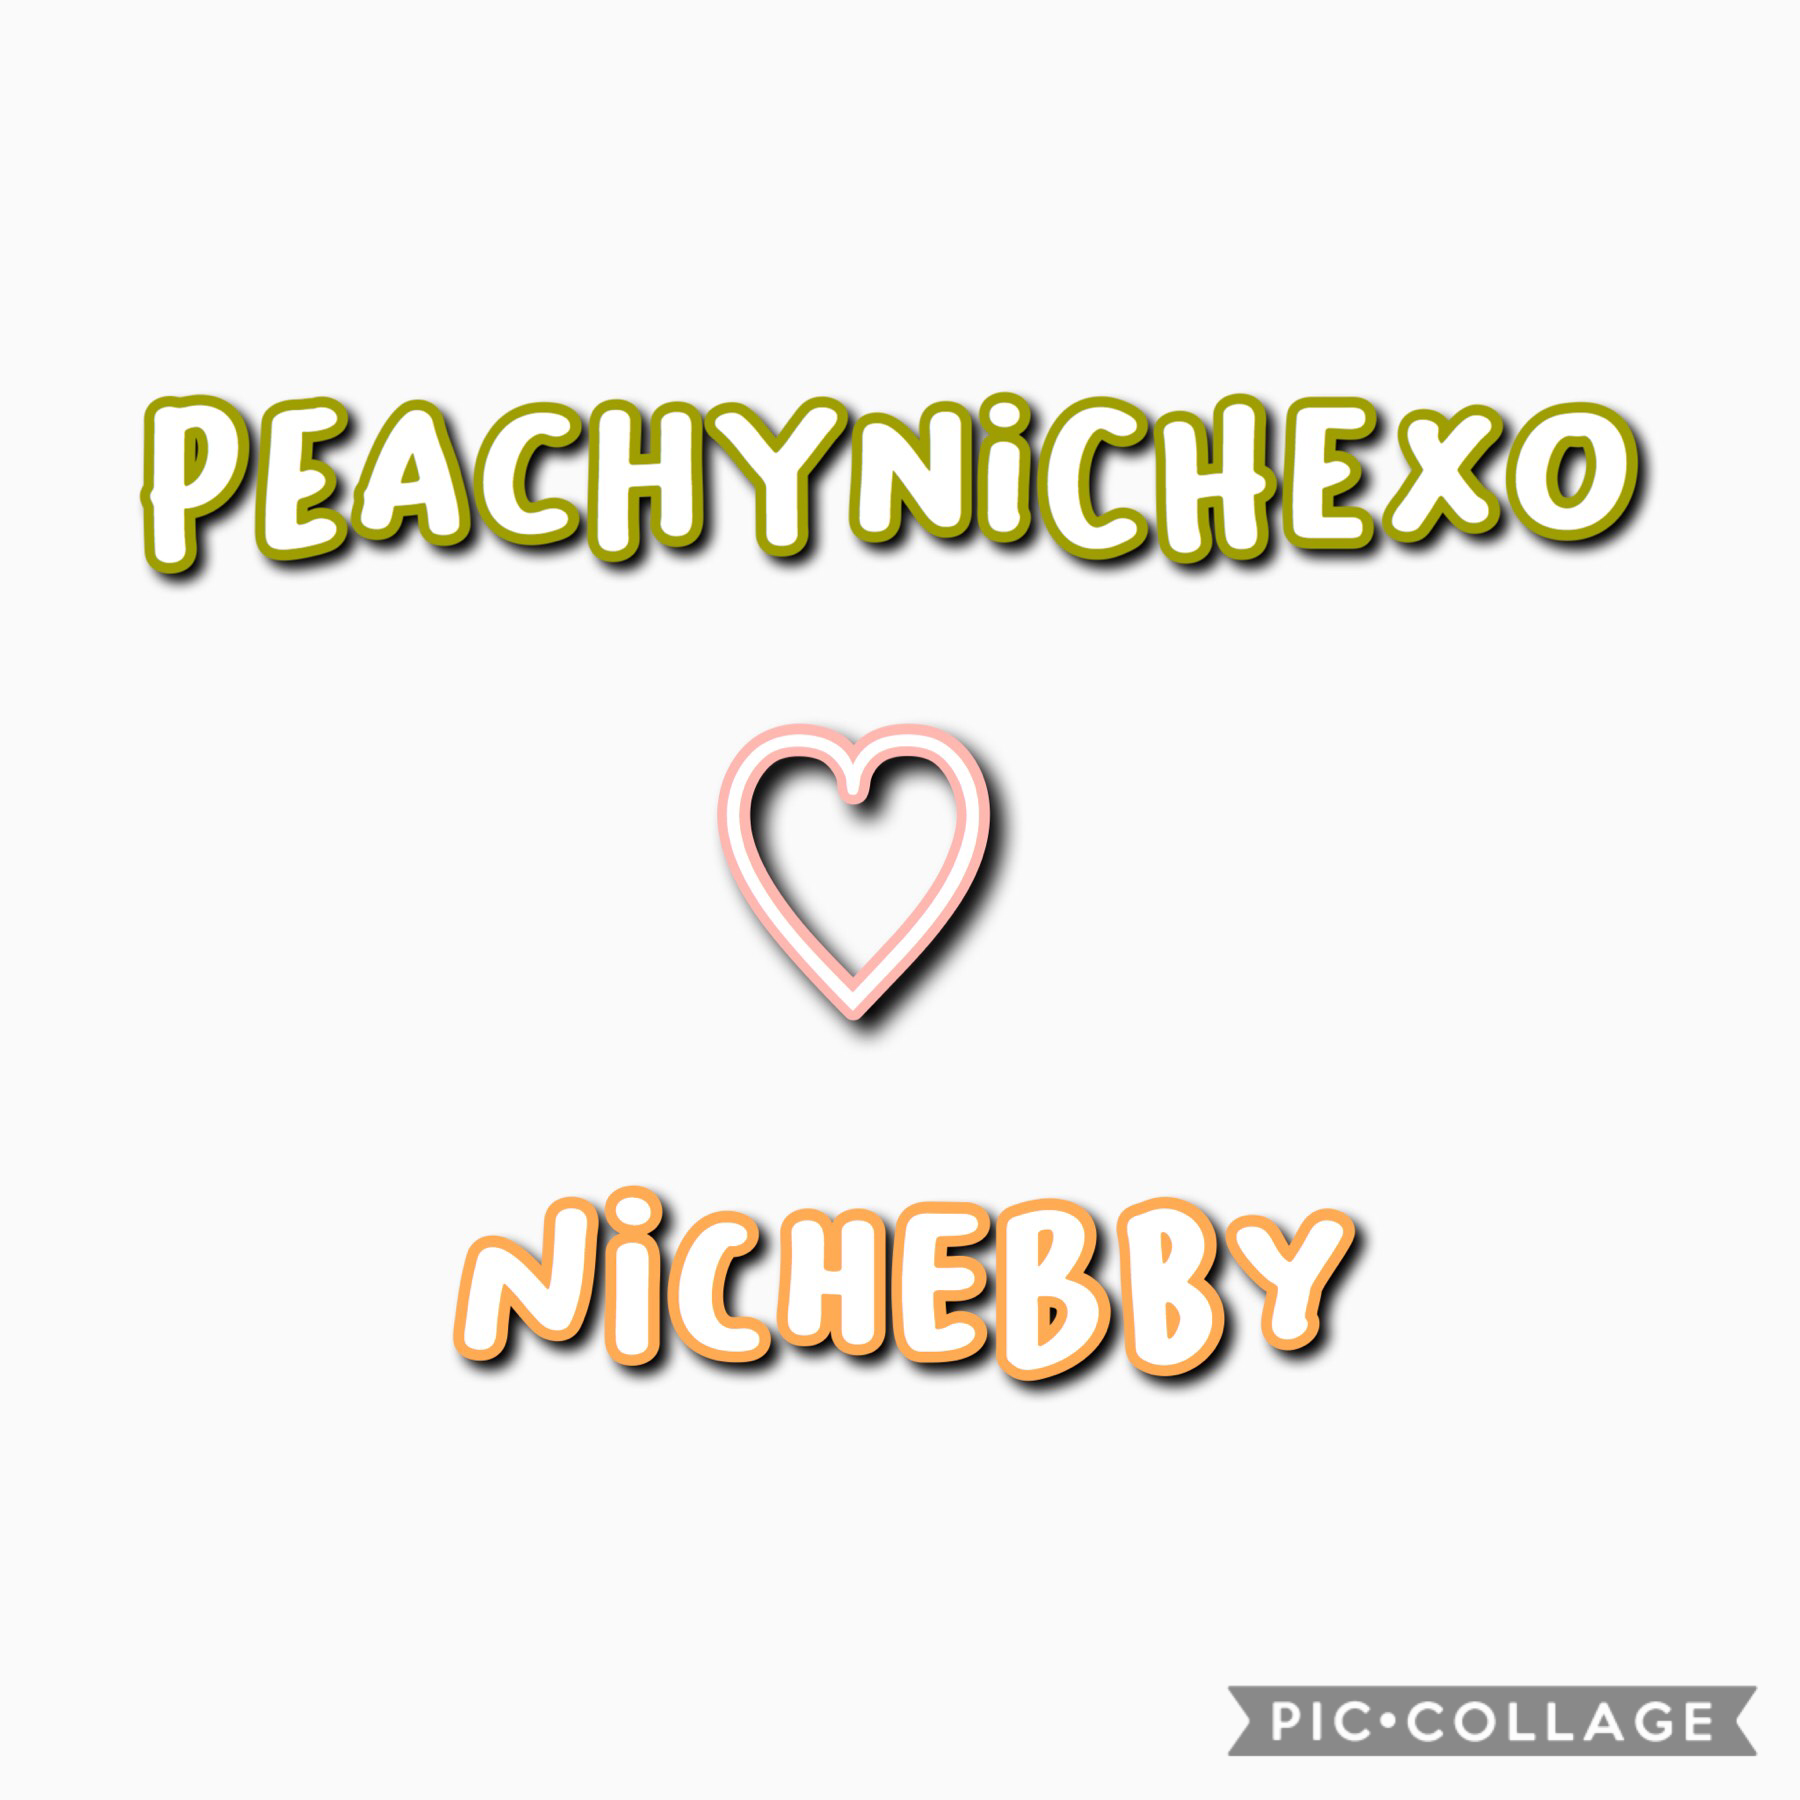 💫Tap




nichebby::♡
Hey Loves!!So I decided to change my username to @nichebby💕

—date:7/29/18
—time:10:12pm
—I’m gonna do a face reveal 
::♡
